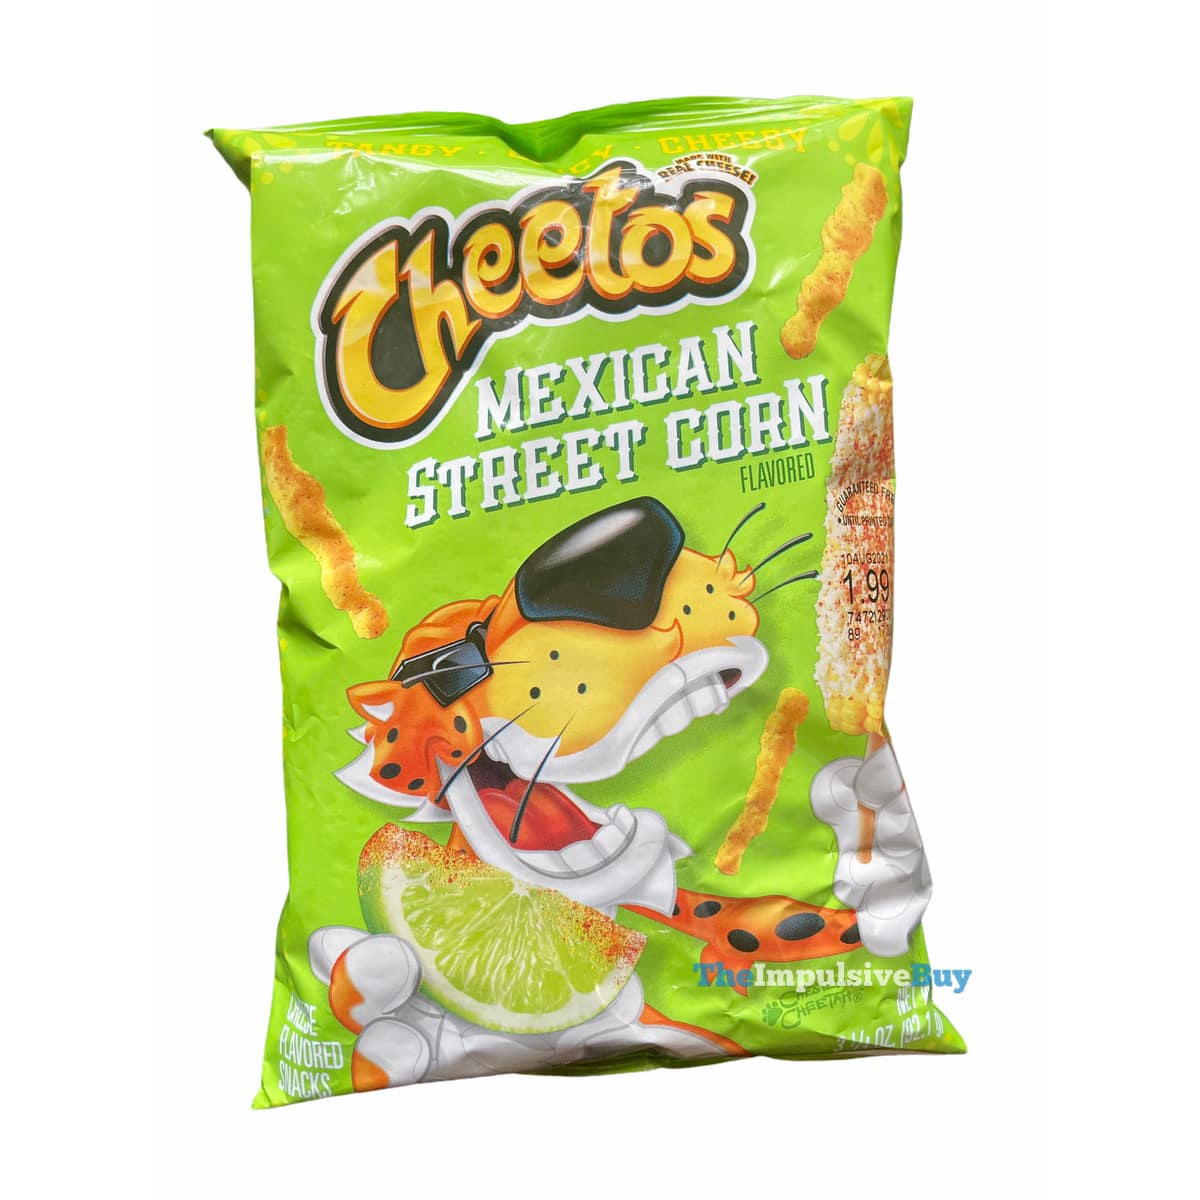 REVIEW: Mexican Street Corn Cheetos - The Impulsive Buy